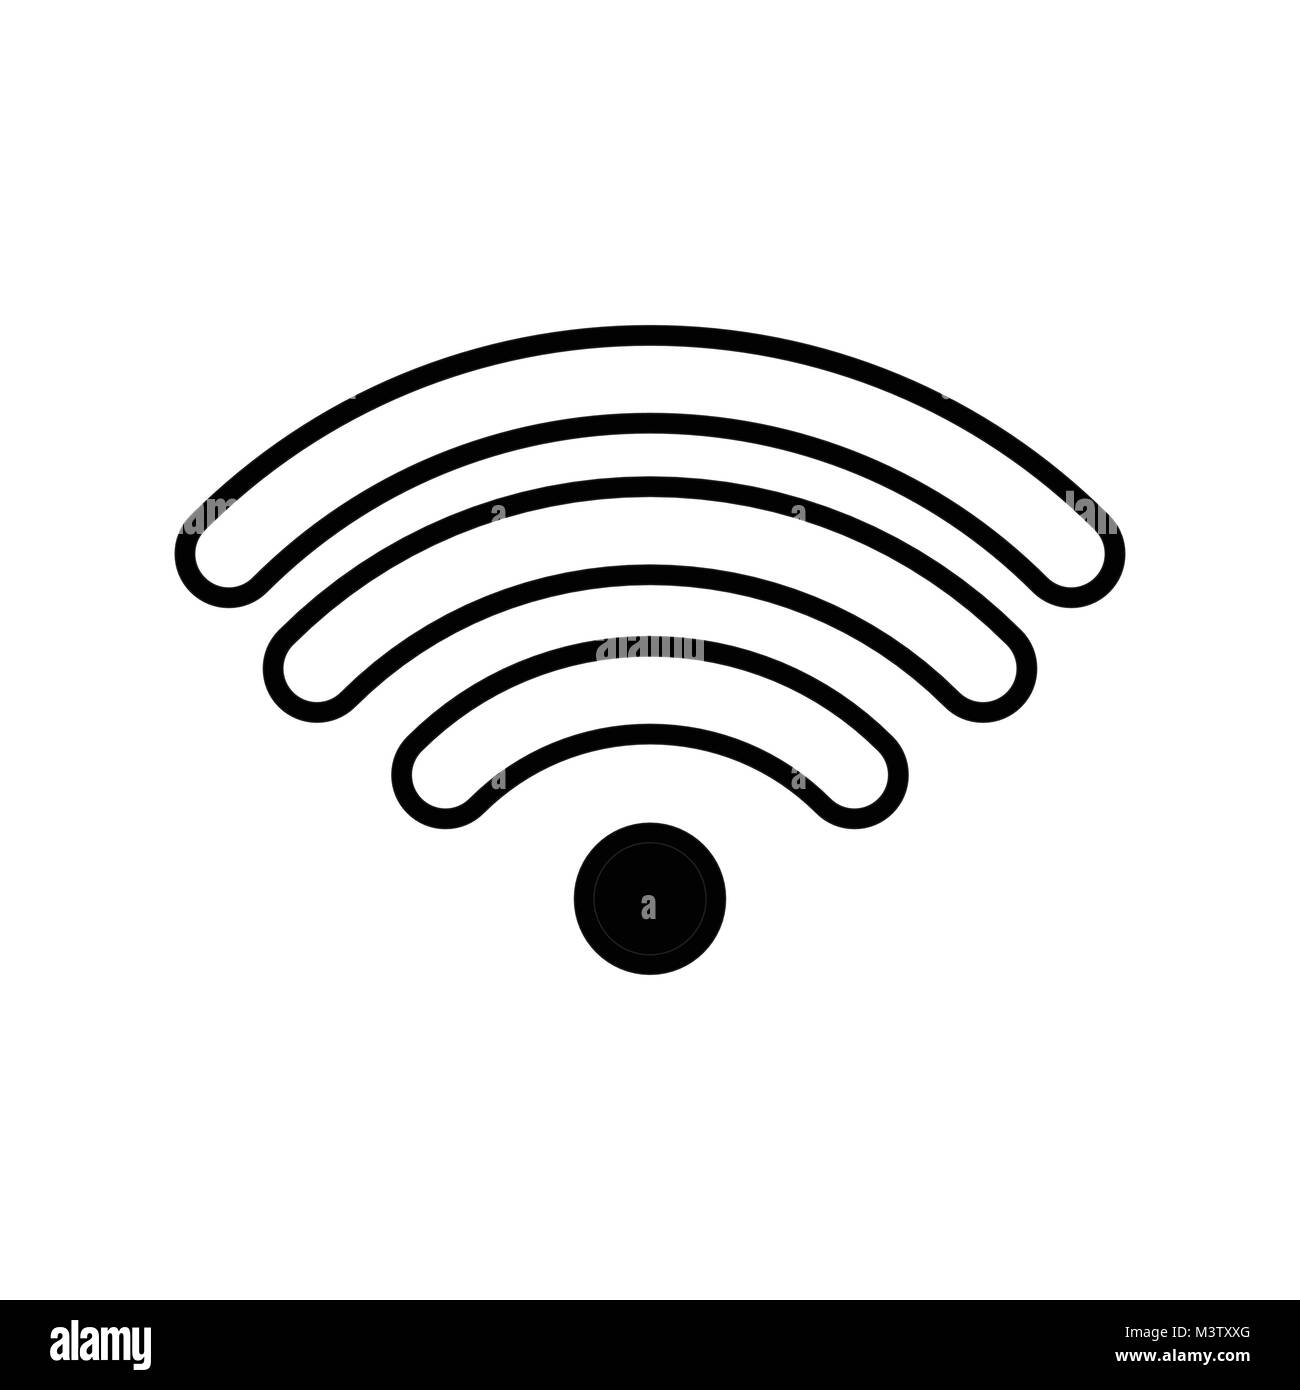 Very weak wifi signal with black dot center Stock Vector